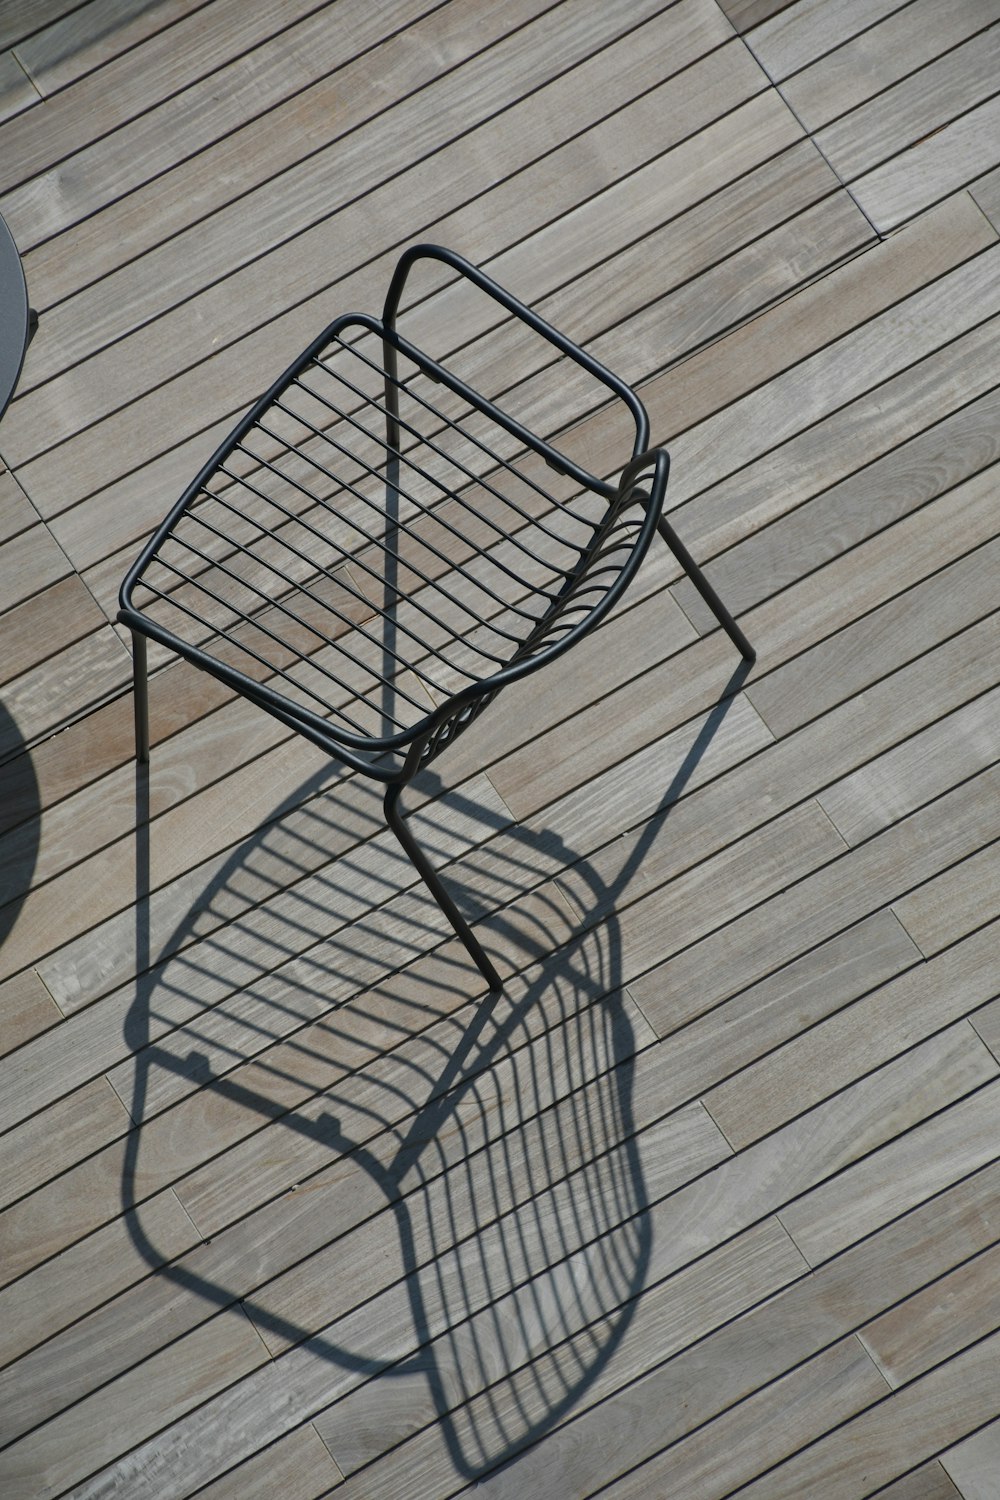 a metal chair sitting on top of a wooden floor